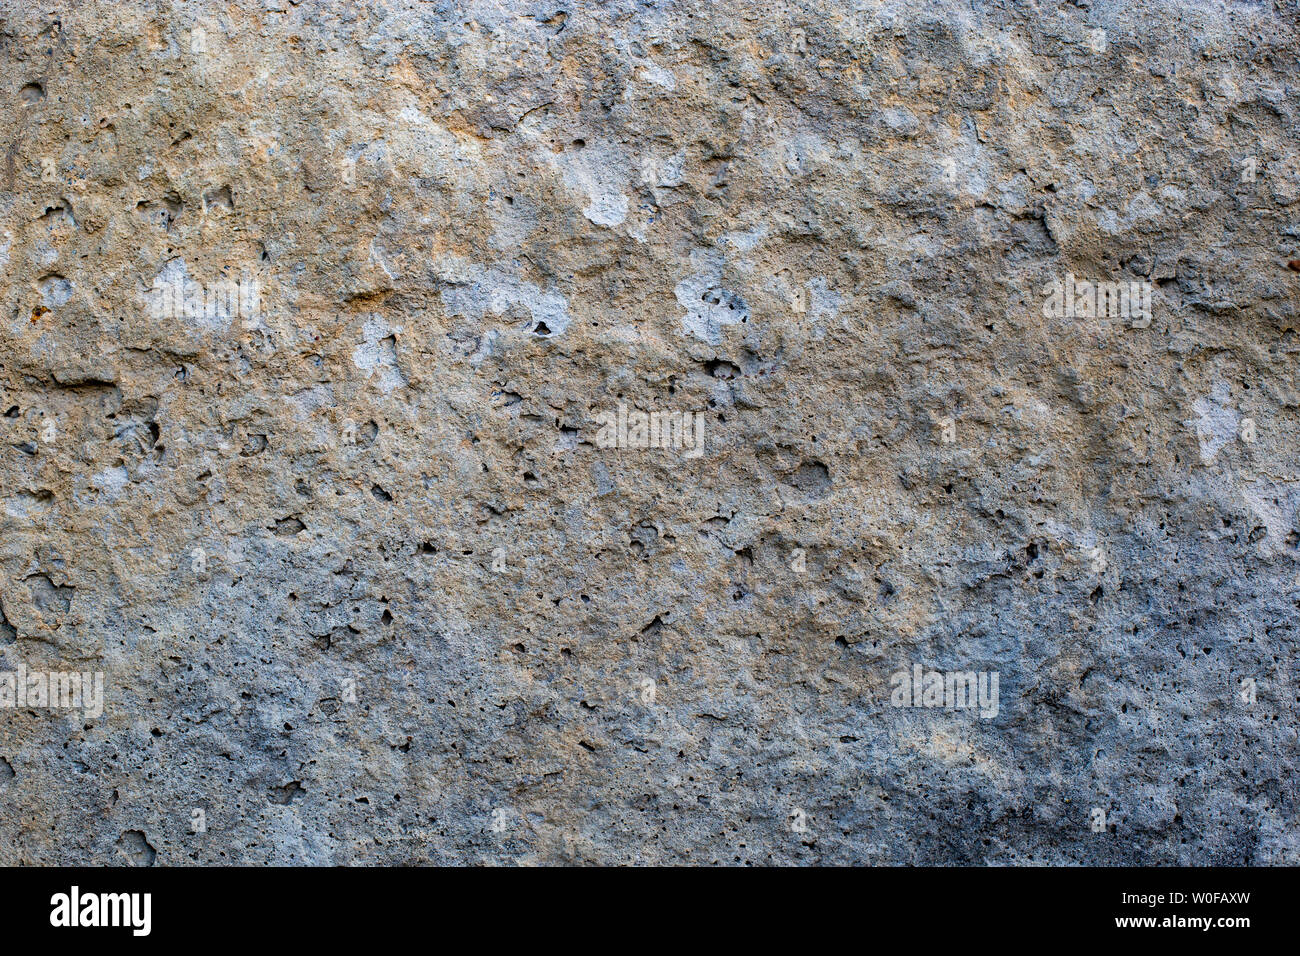 Details of rock texture. Stock Photo